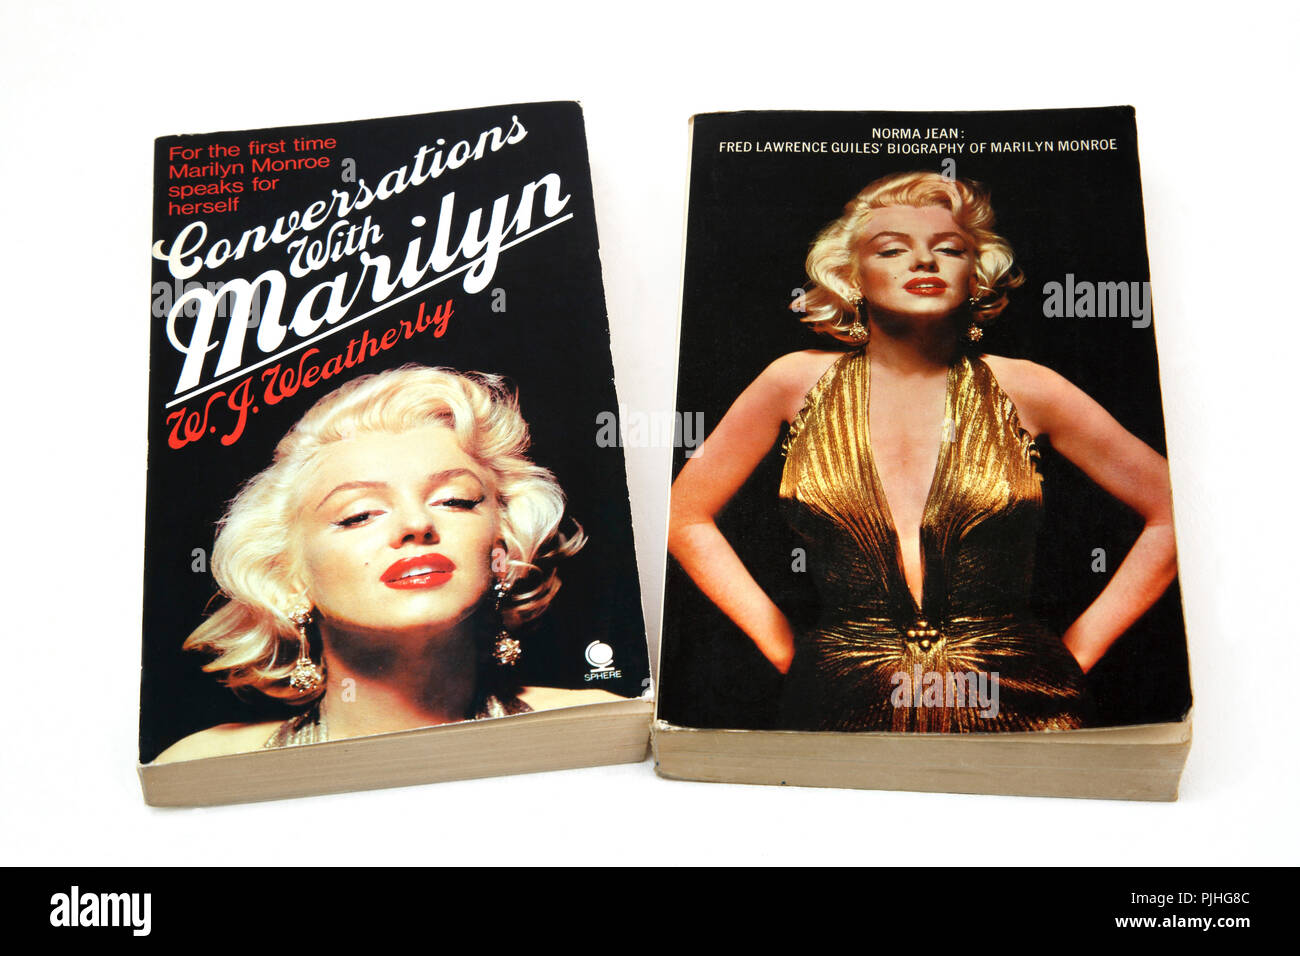 Paperback Books on Marilyn Monroe - Conversations with Marilyn and Norma Jean  Fred Lawrence Guiles' Biography of Marilyn Monroe Stock Photo